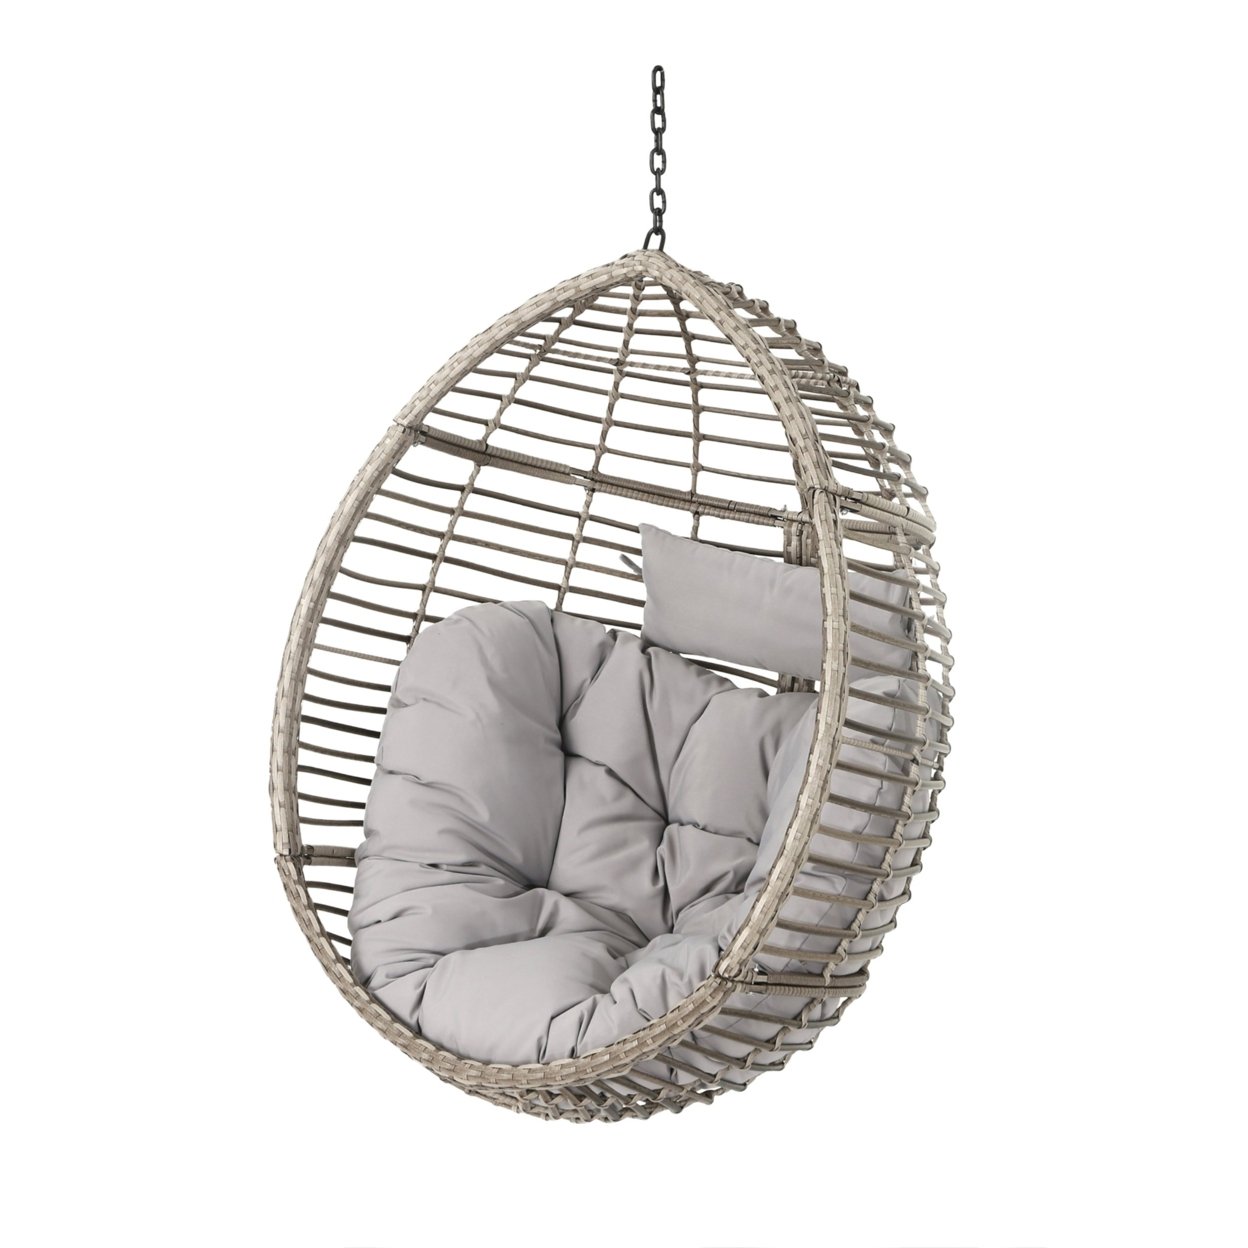 Leasa Outdoor Hanging Basket Chair (Stand Not Included) - Gray